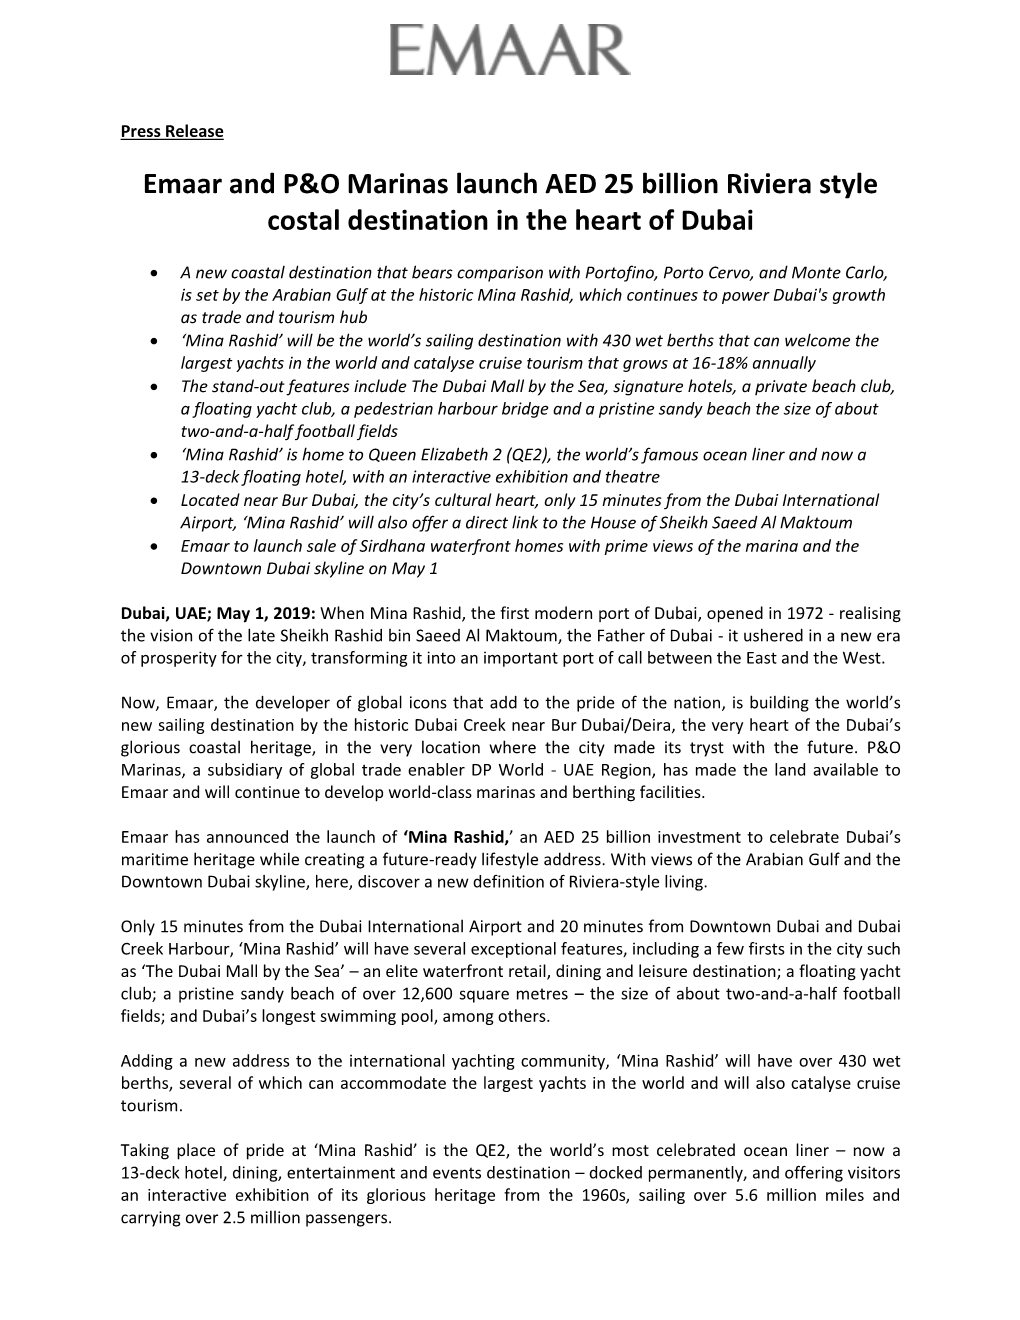 Emaar and P&O Marinas Launch AED 25 Billion Riviera Style Costal